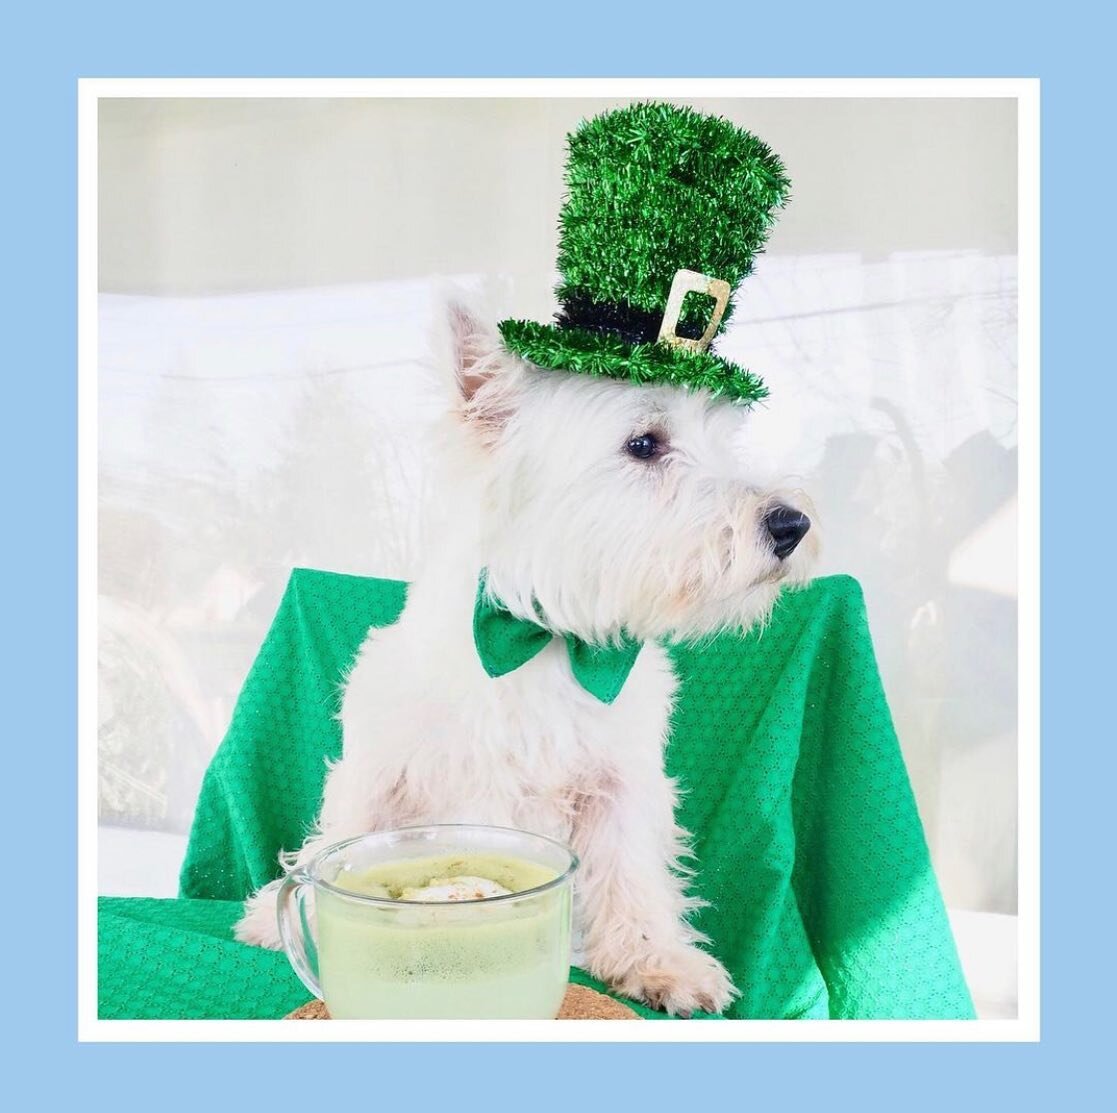 Happy St. Patrick&rsquo;s Day from Oswald, the Public Relations Manager at the Lebanon Chamber of Commerce, and Michael&rsquo;s BFF. #westiesofinstagram #matcha